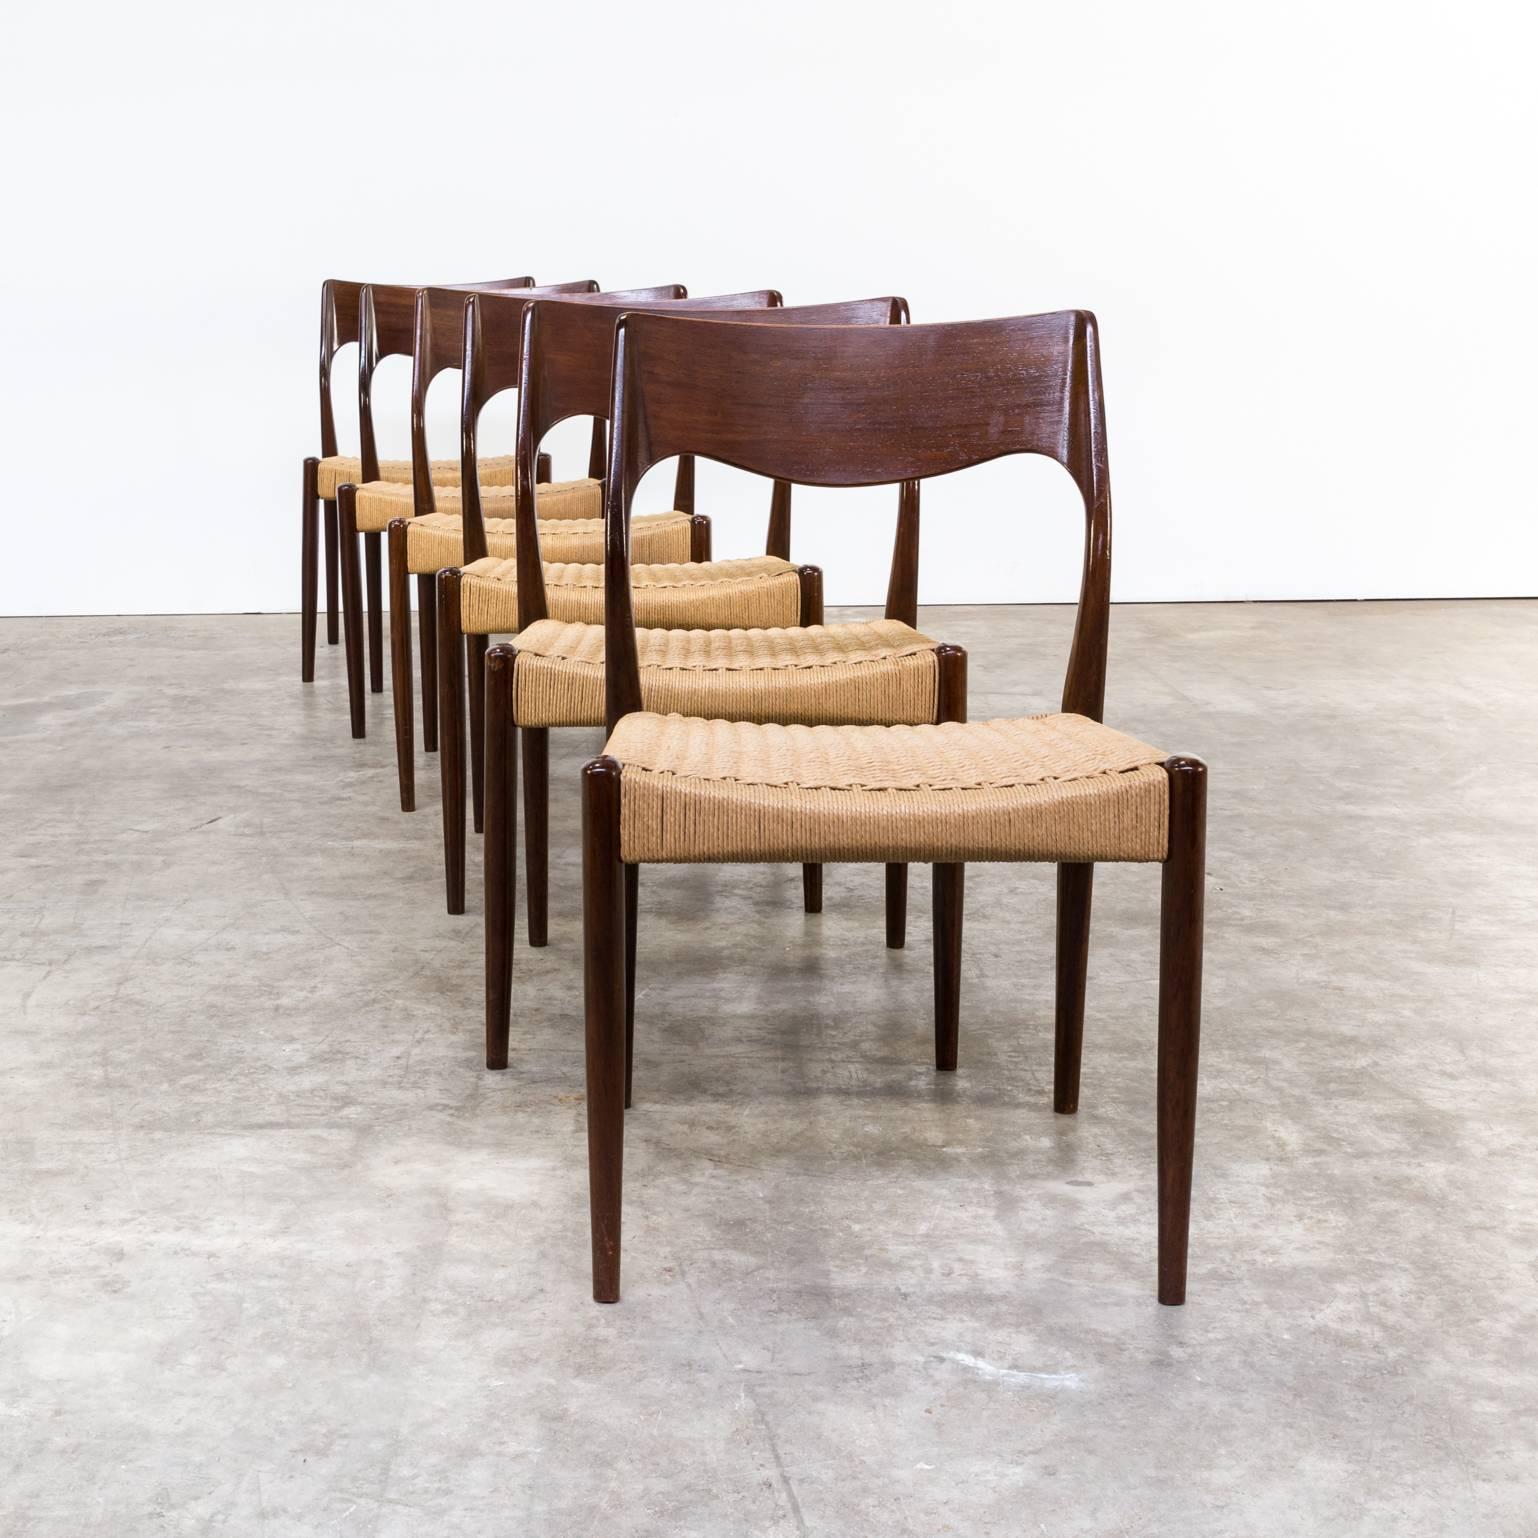 1960s Niels Otto Møller model 71 dinner chairs for J.L. Møller, set of six, model 71 in rosewood frame and papercord seat. Good condition wear consistent with age and use.